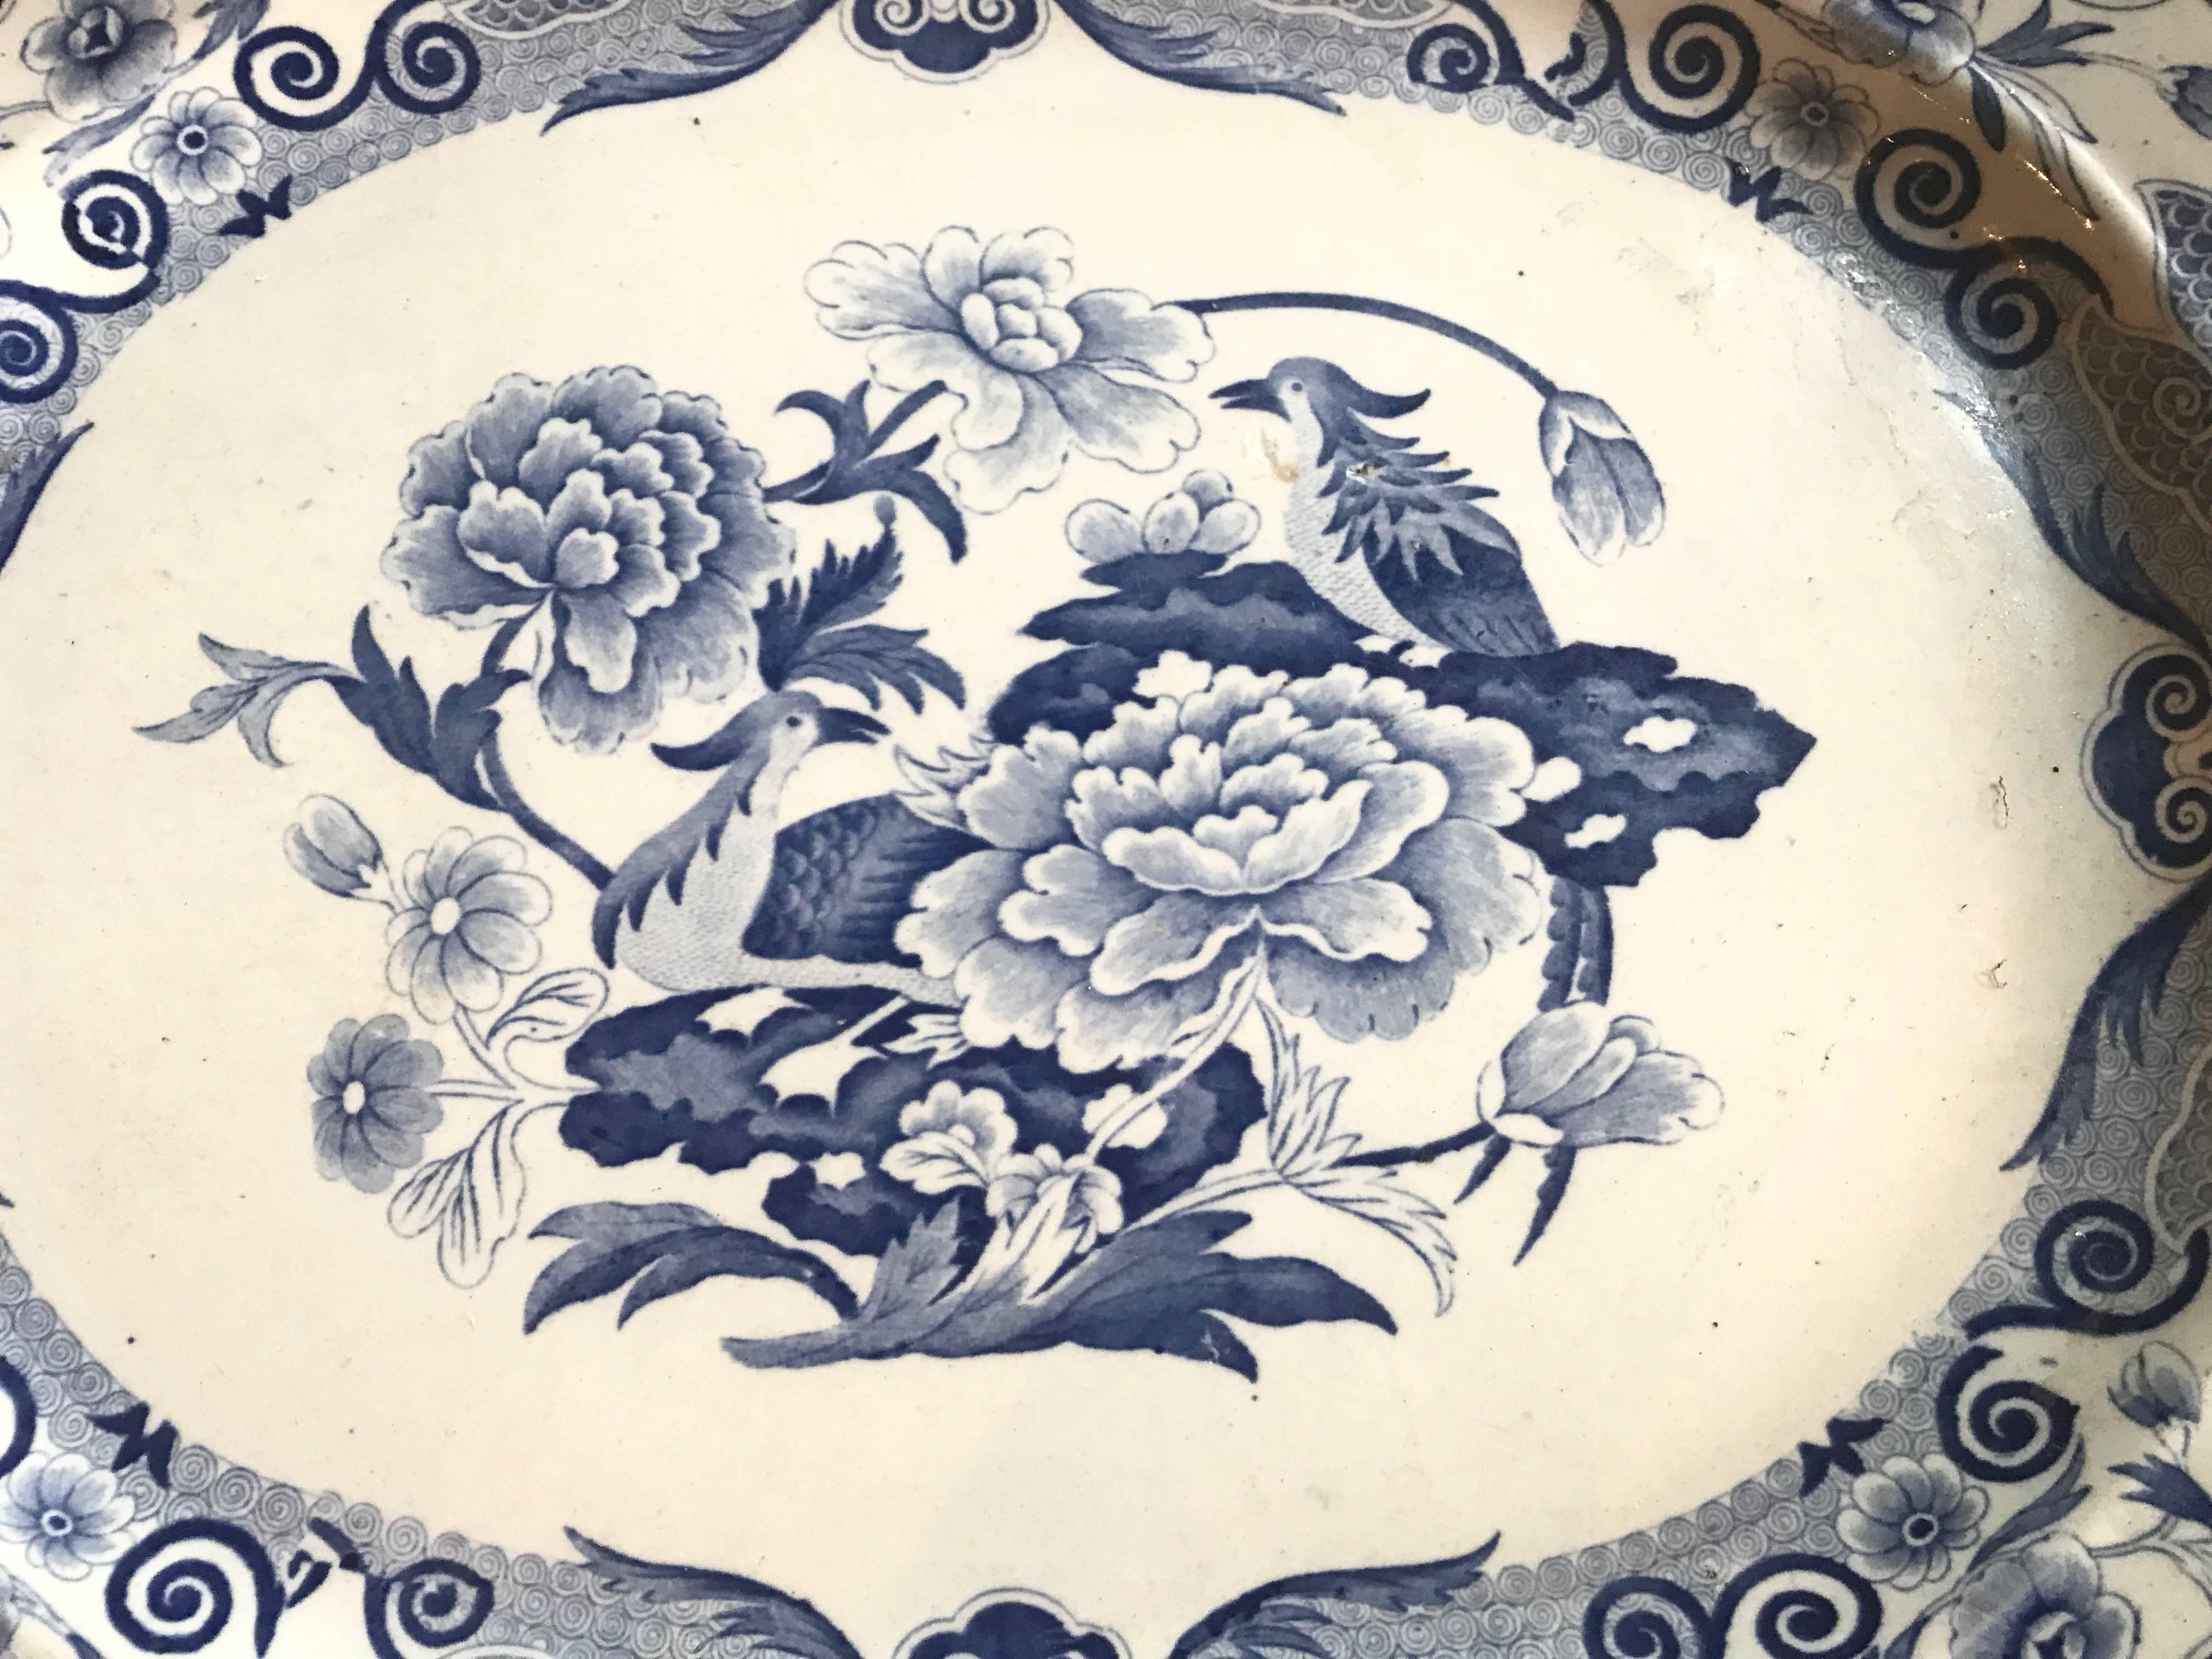 Blue and white transferware platter with impressive scale and beautiful decoration.